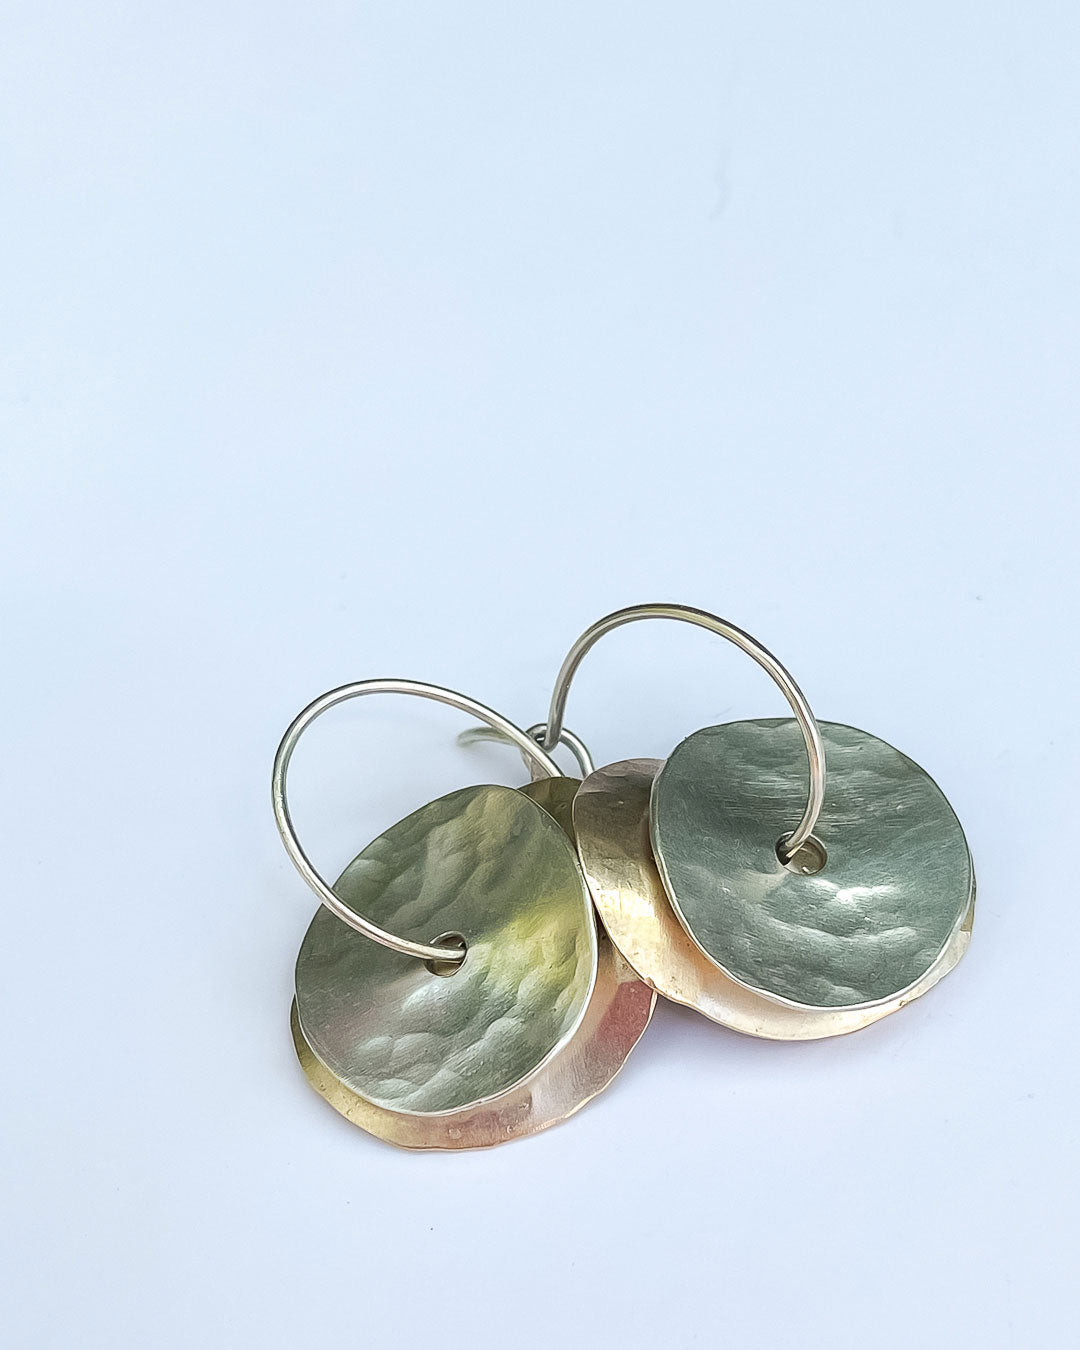 Multi Layered 9ct Gold and Sterling Silver earring formed with curved discs hanging from hoops